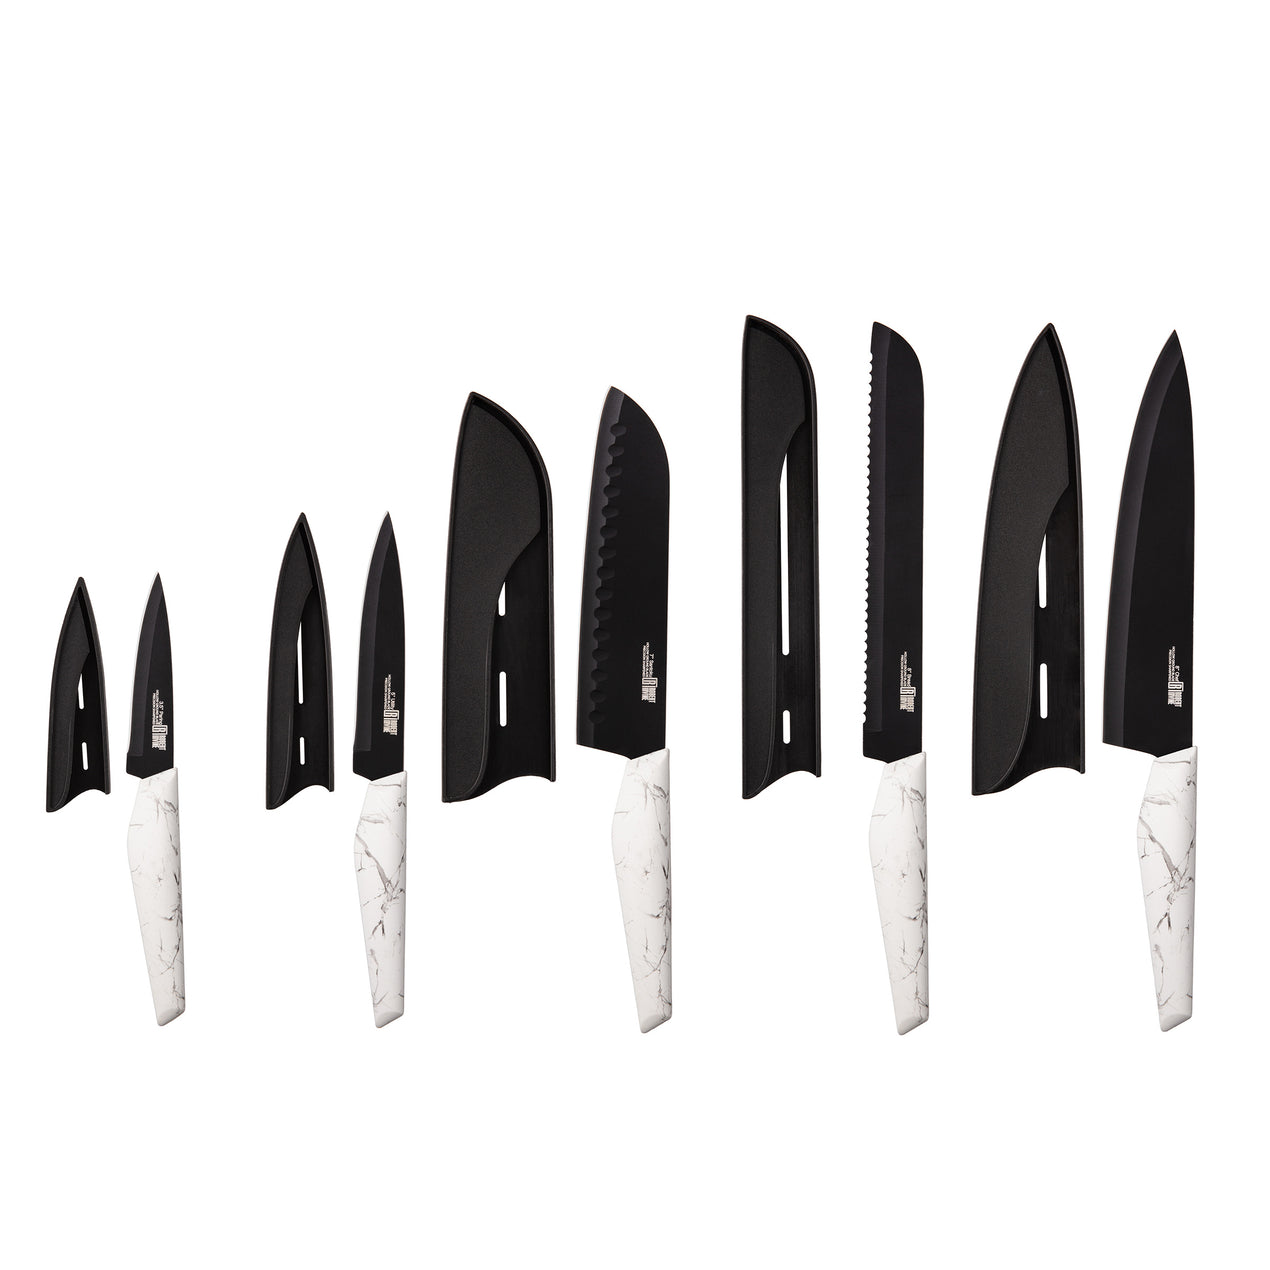 10-Piece Marble-Look Knife & Sheath Set, White, Plastic Sold by at Home